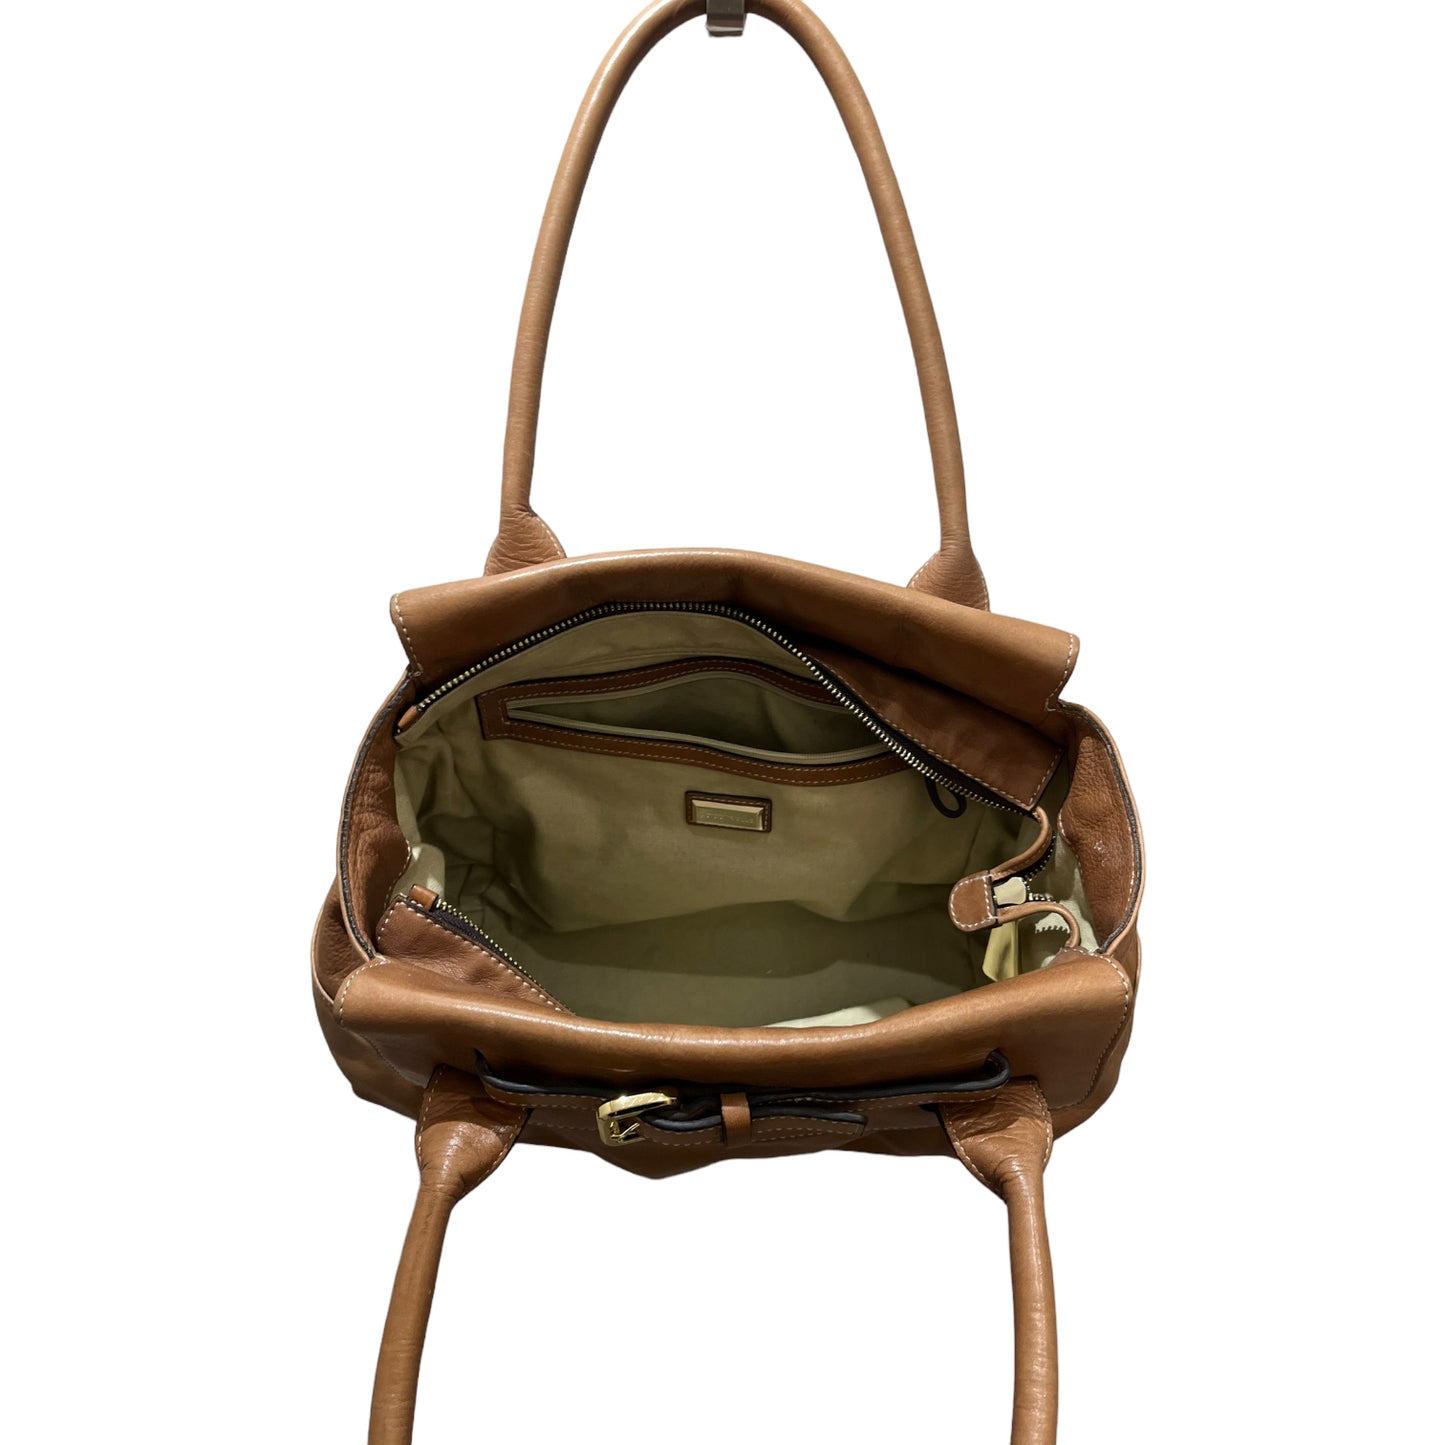 Coccinelle Tan Leather Bag